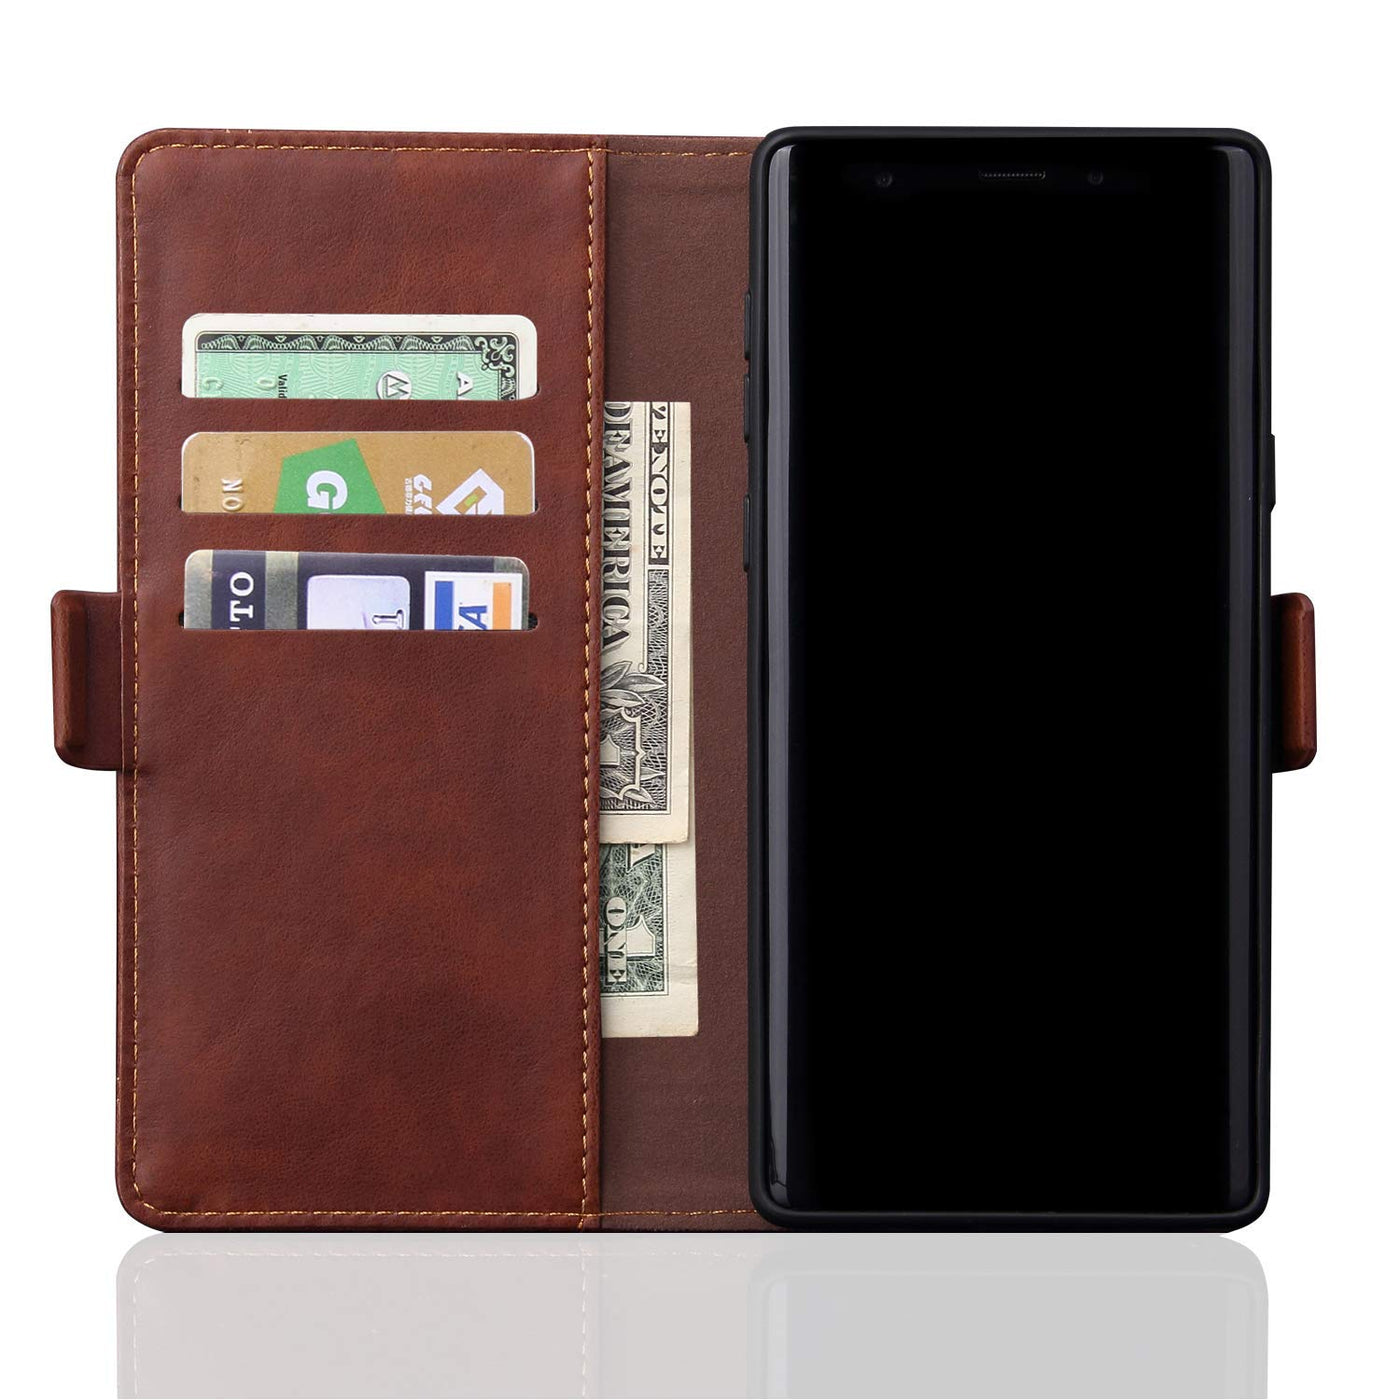 Samsung Galaxy Note 9 Leather Wallet flip case cover with card slots by Excelsior